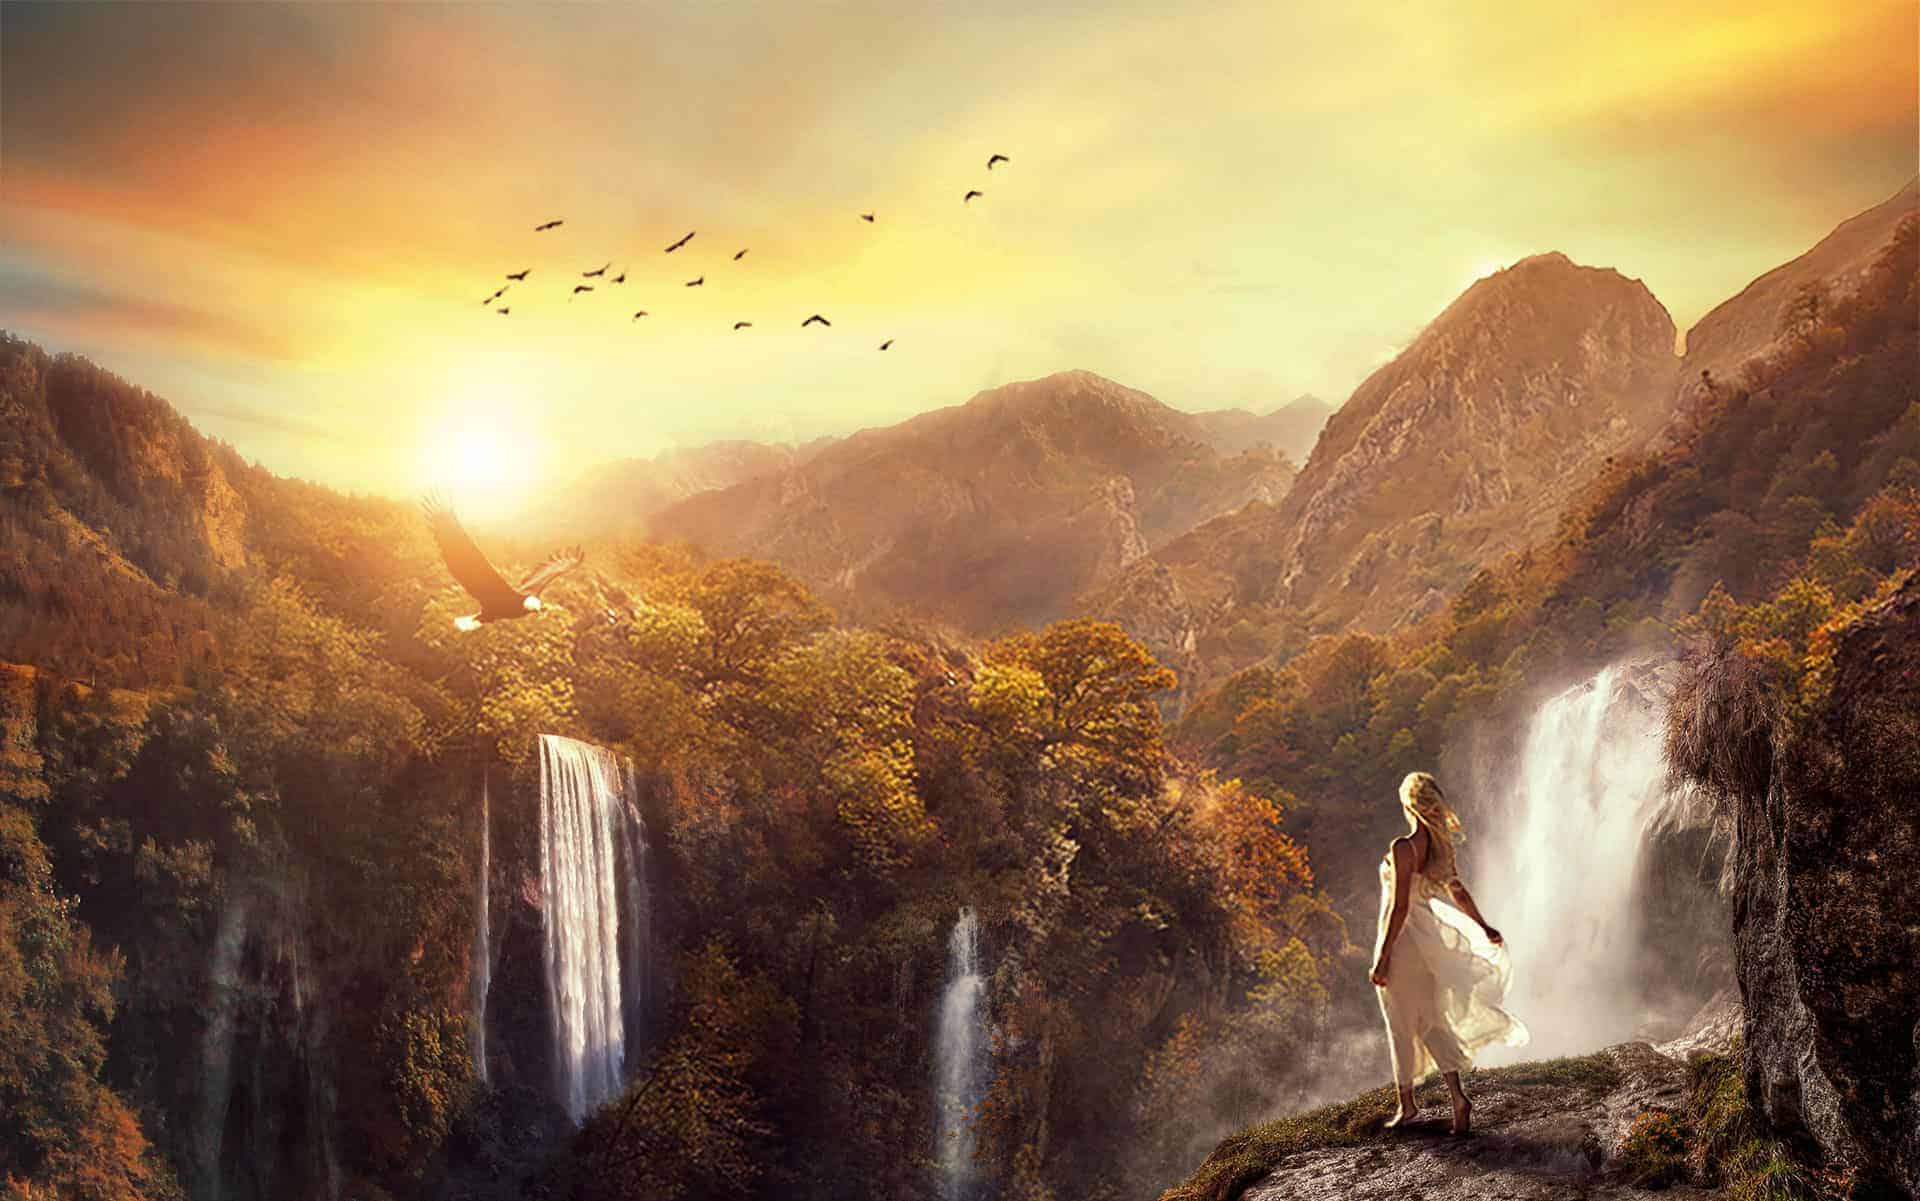 Create This Surreal Scene of Waterfall Mountains with Adobe Photoshop